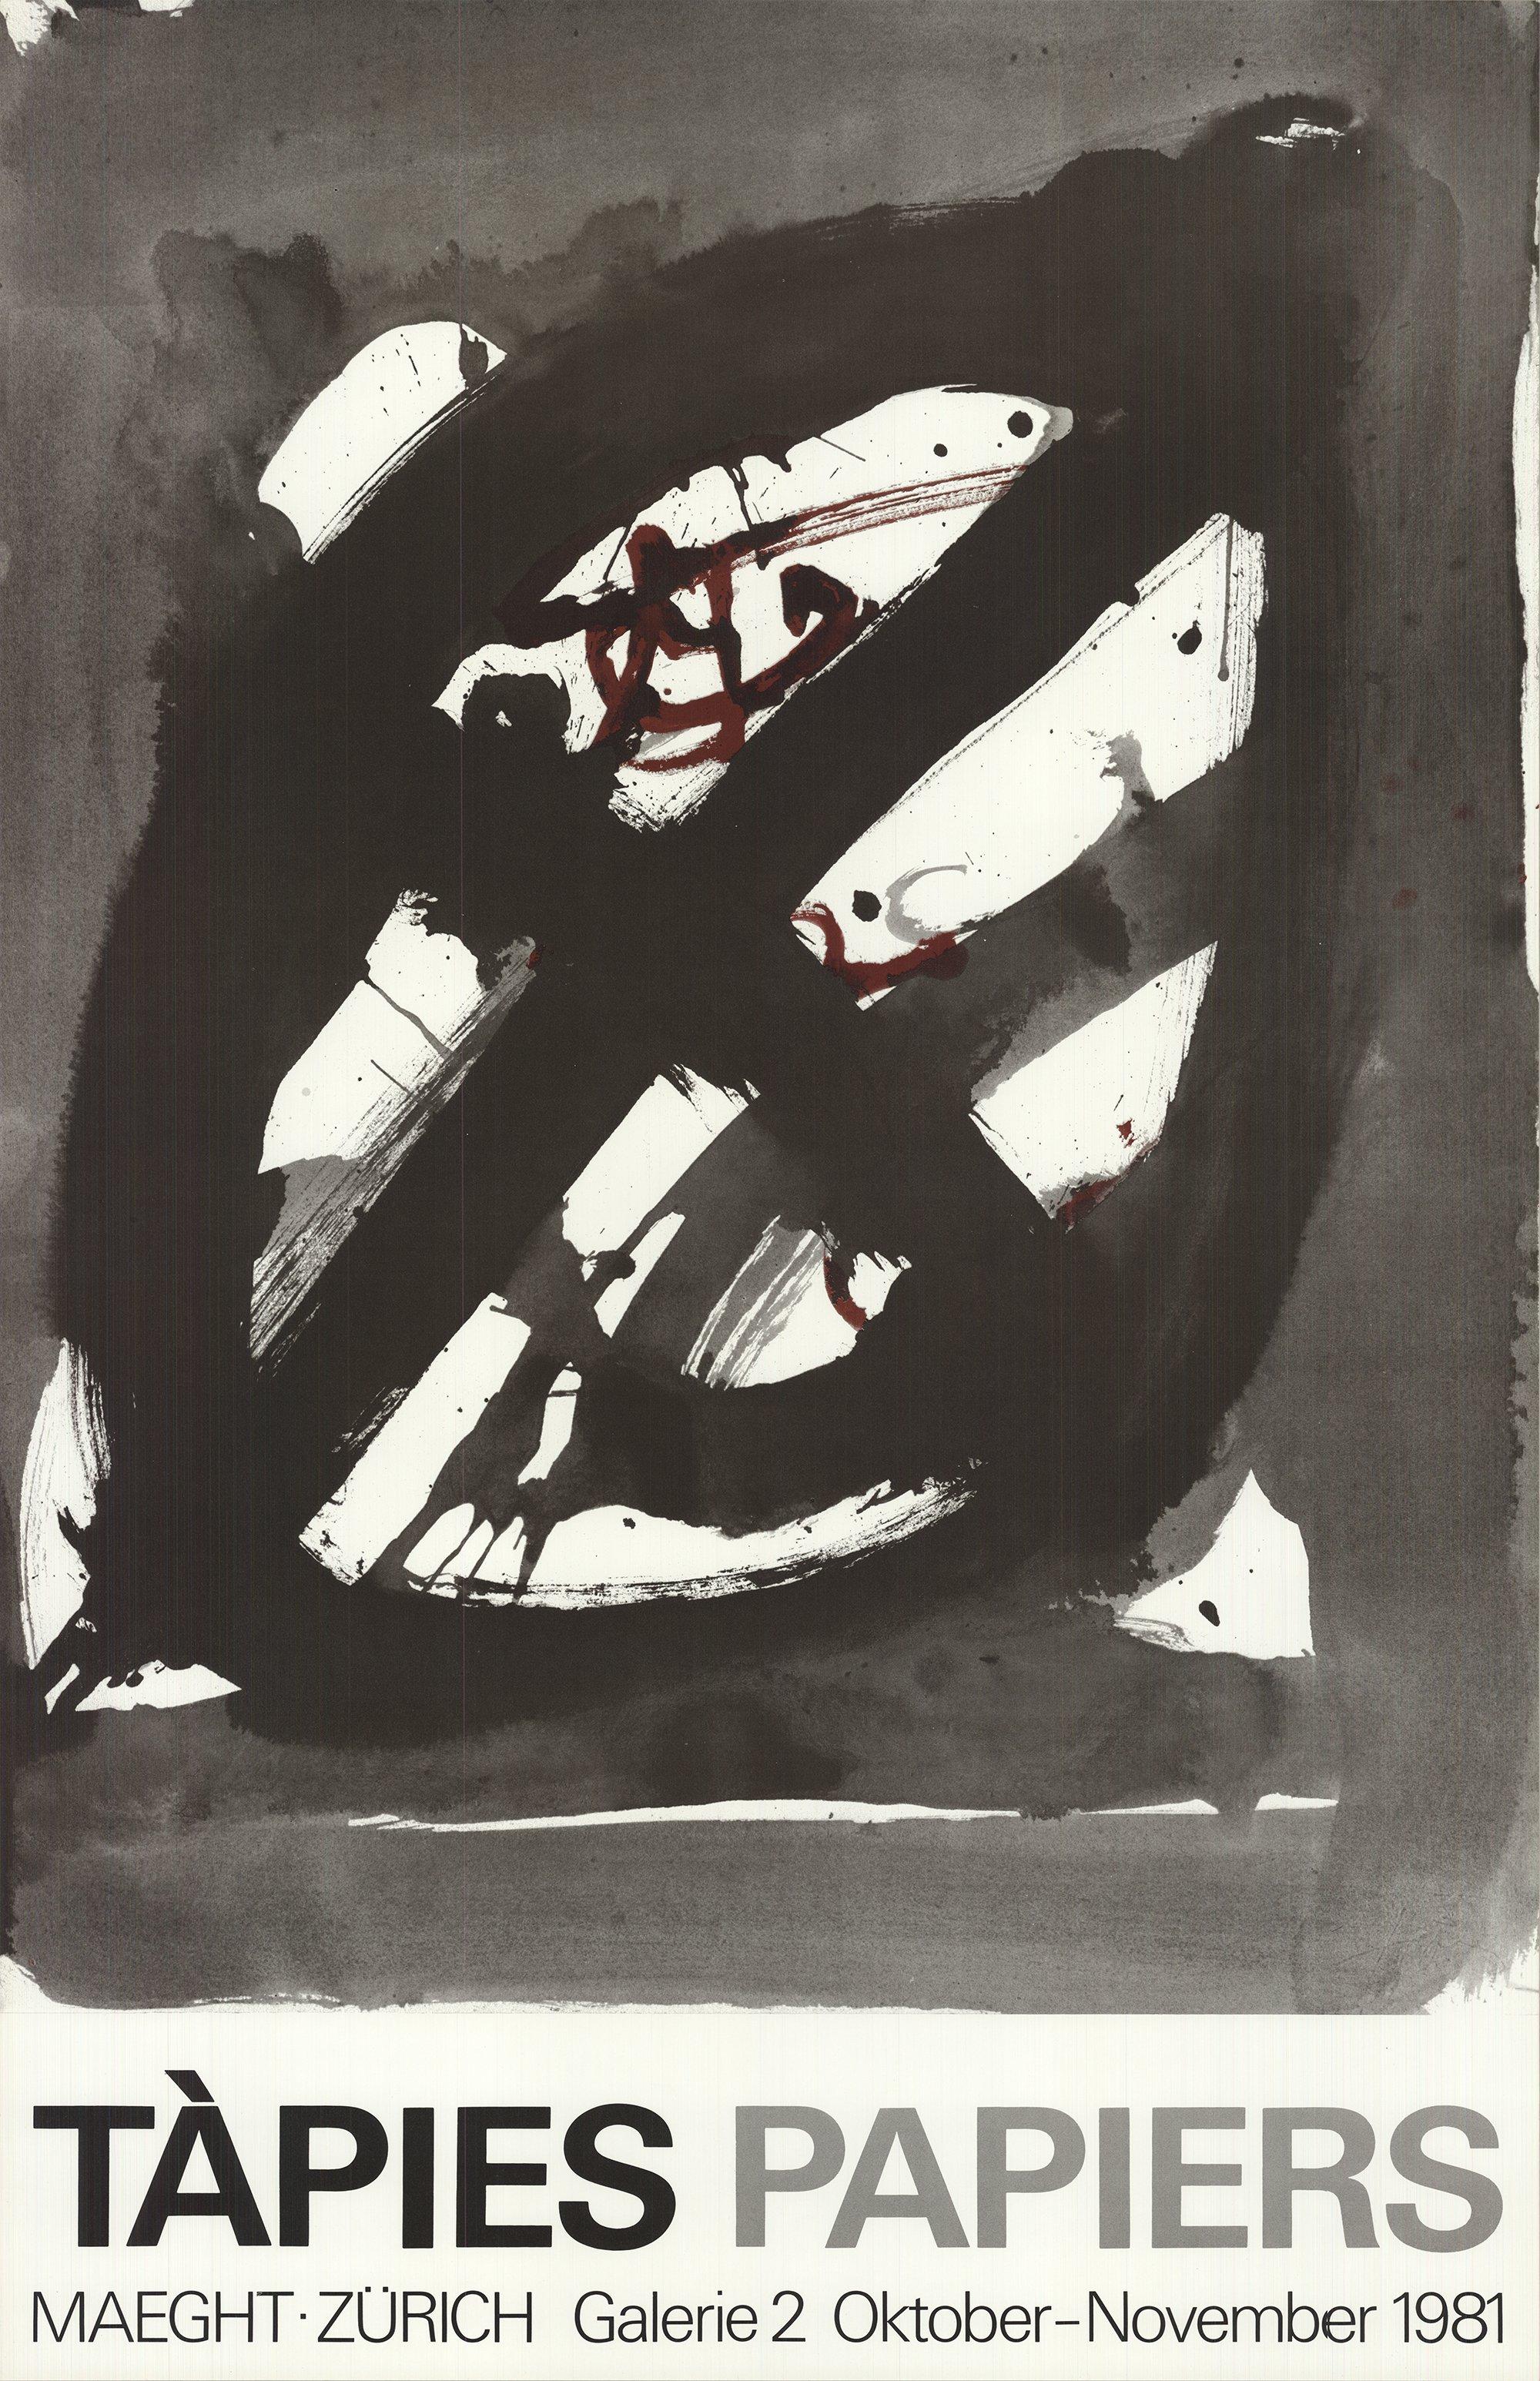 1981 After Antoni Tapies 'Papiers' First Edition - Print by Antoni Tàpies